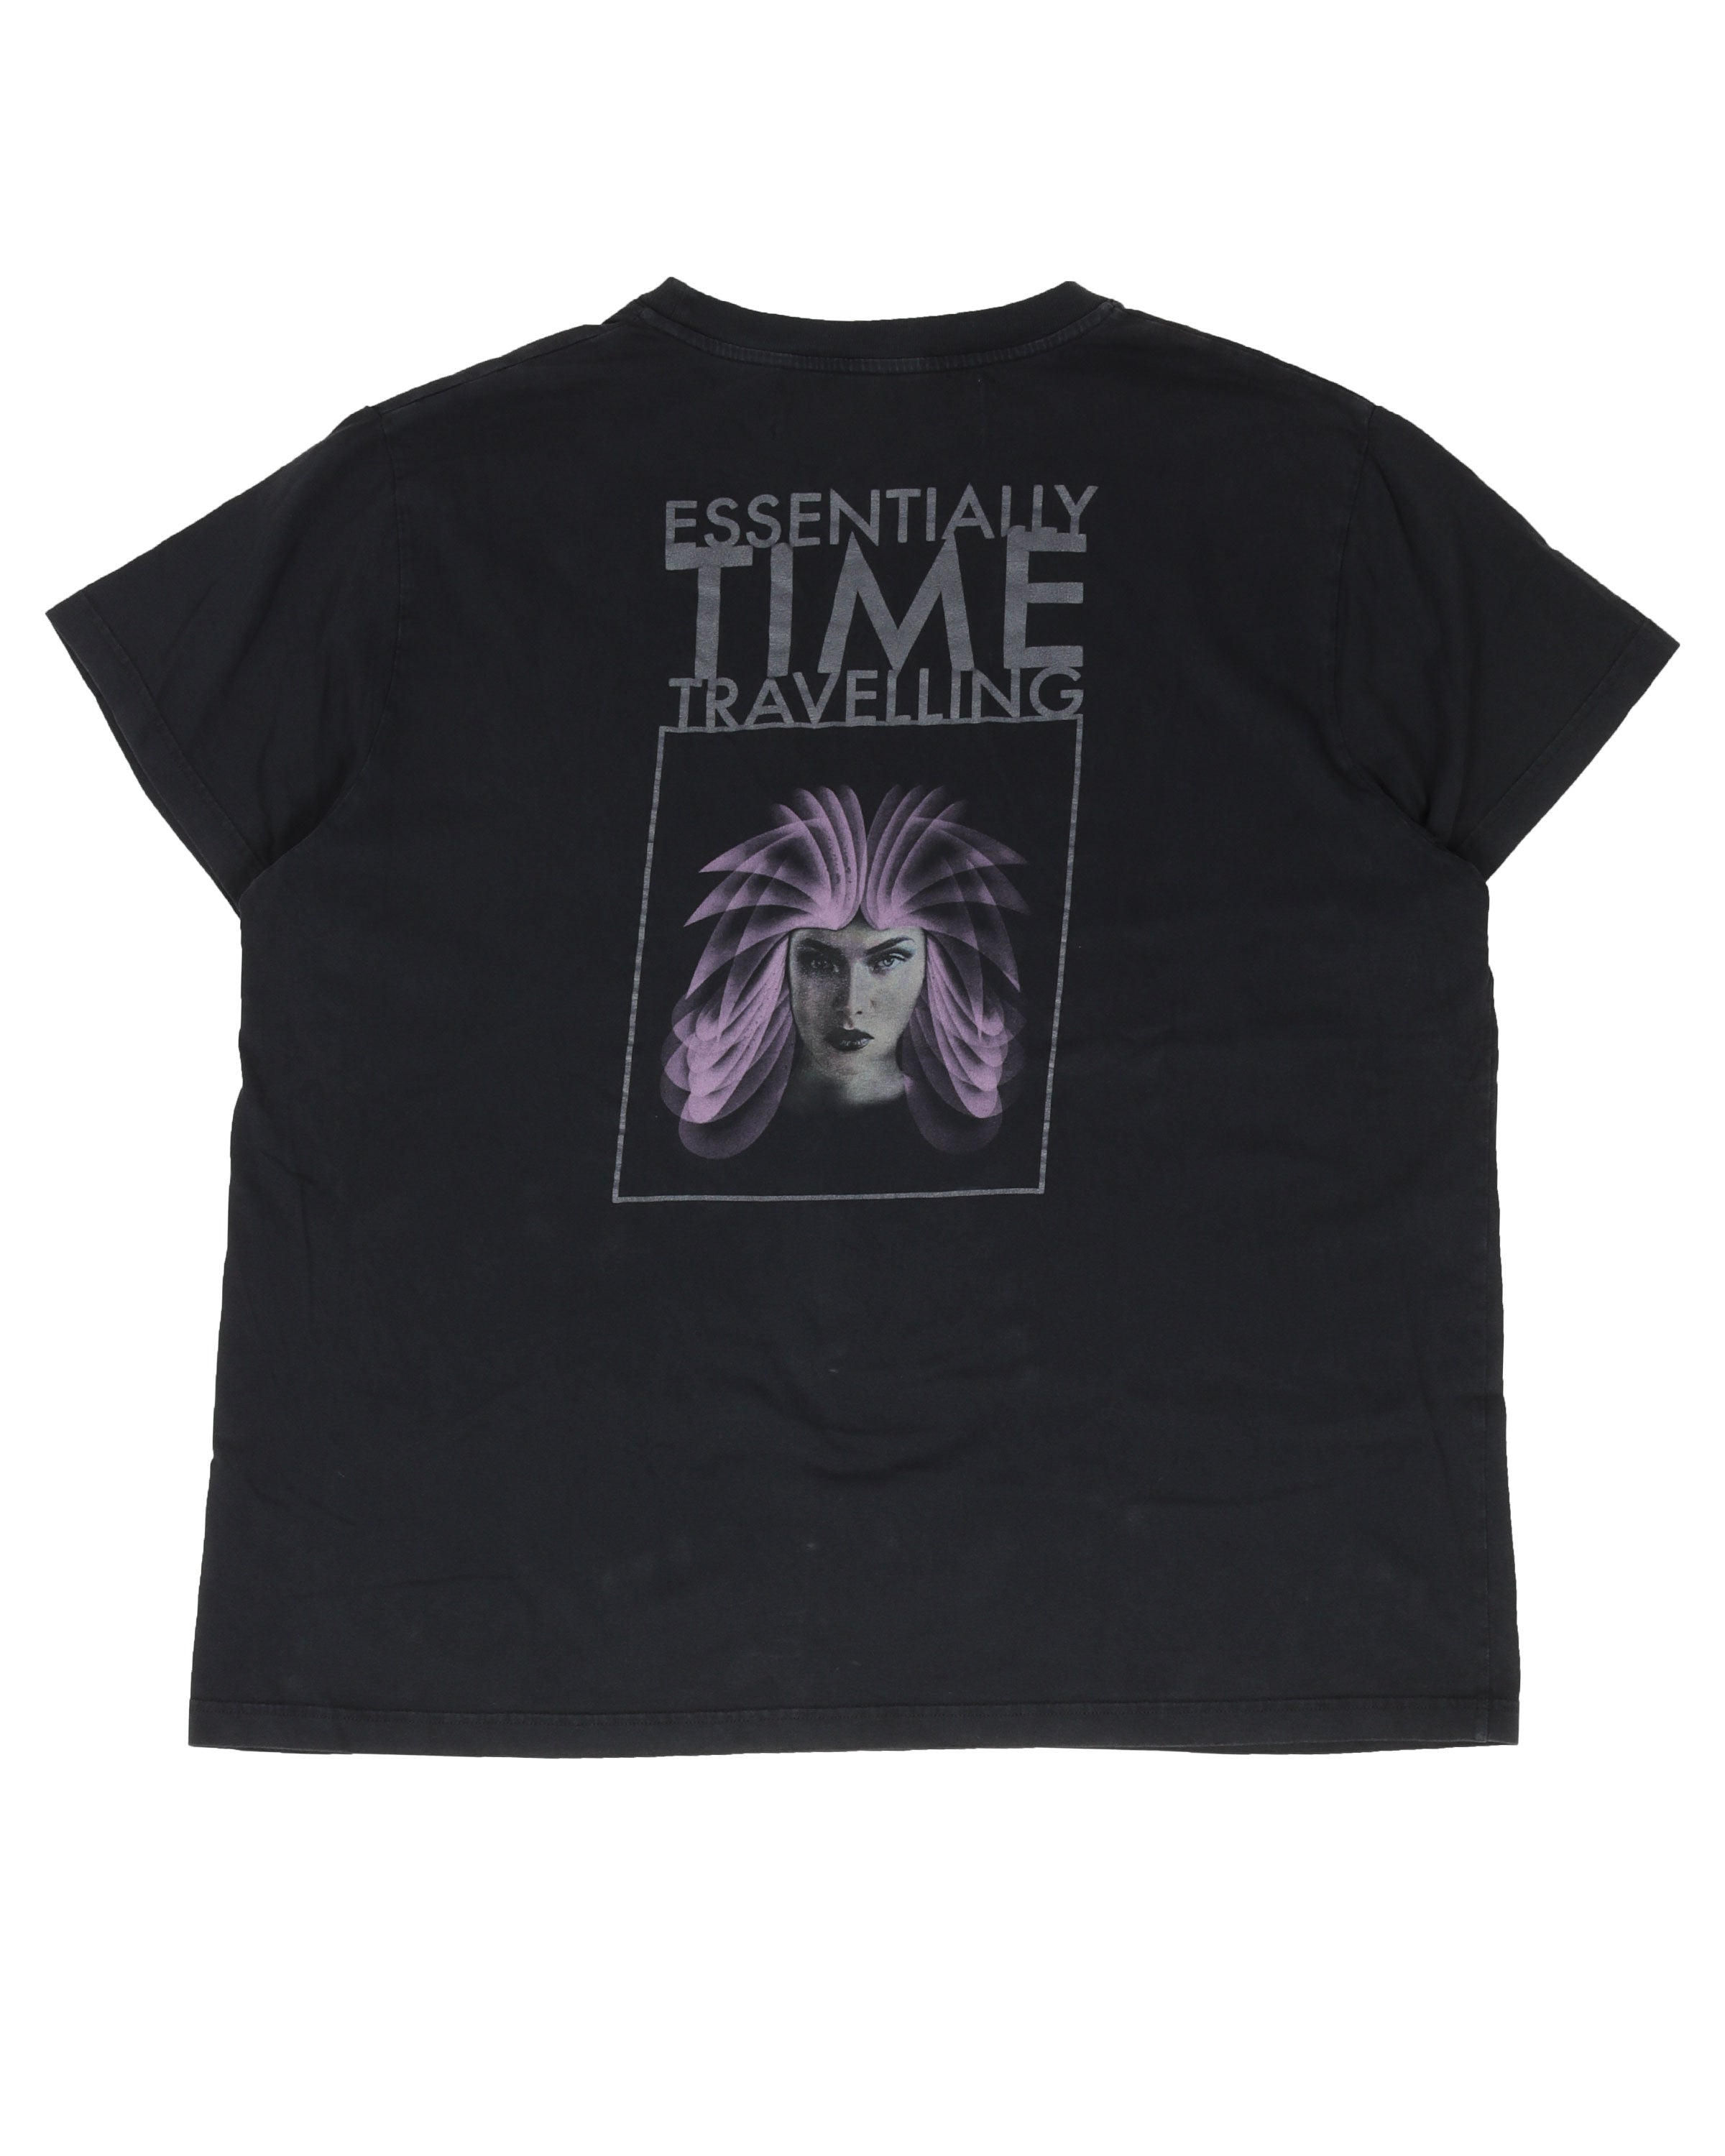 Art Dad "Essentially Time Traveling" T-Shirt